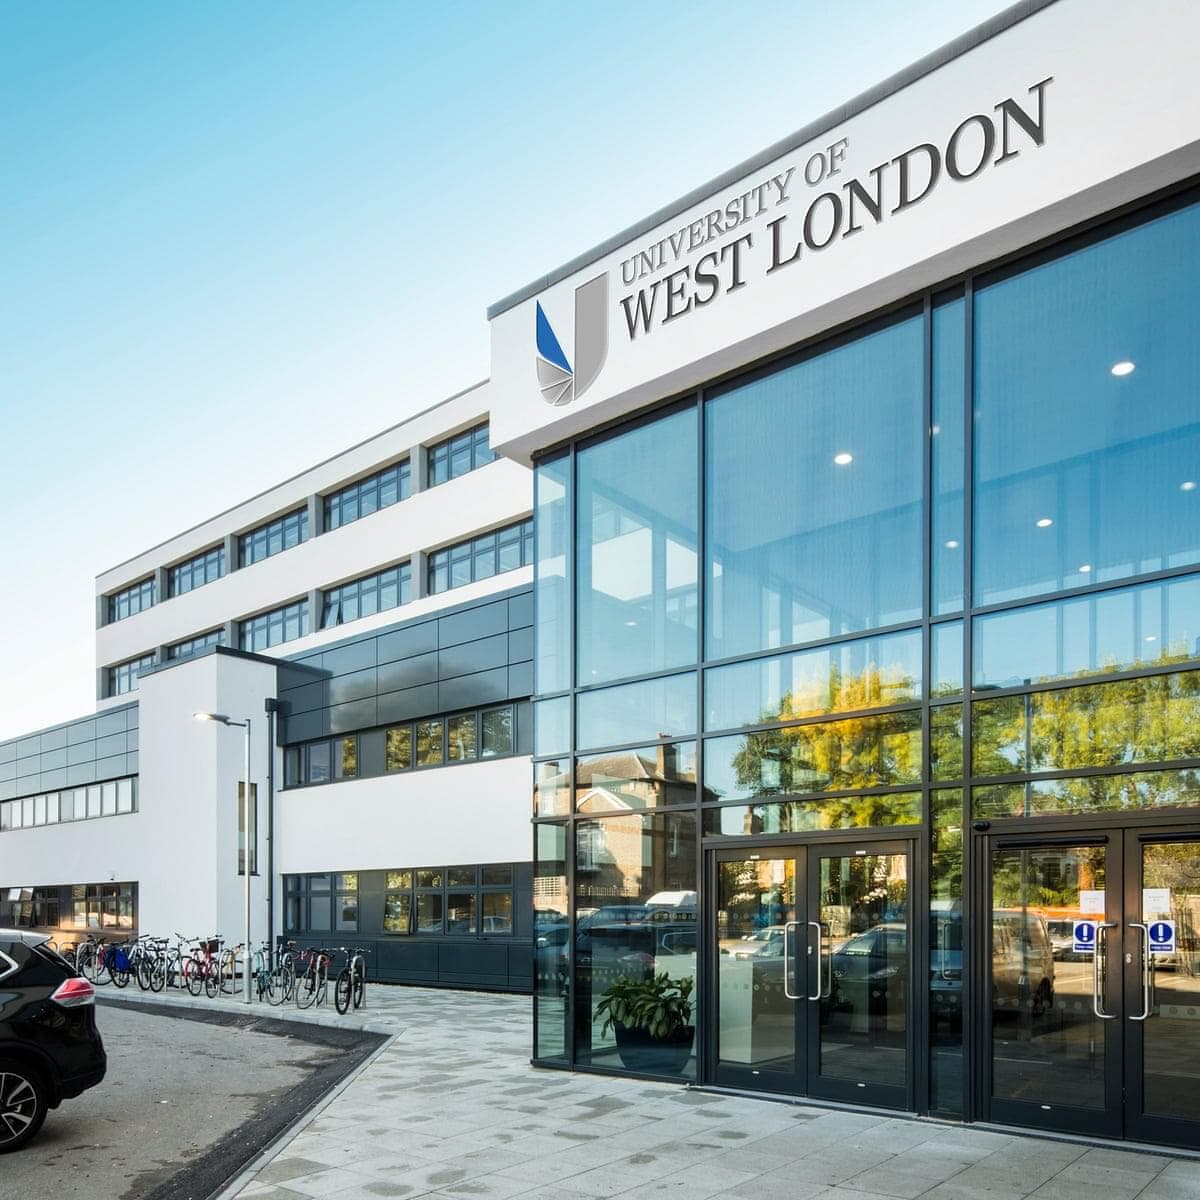 University of West London Featured Image